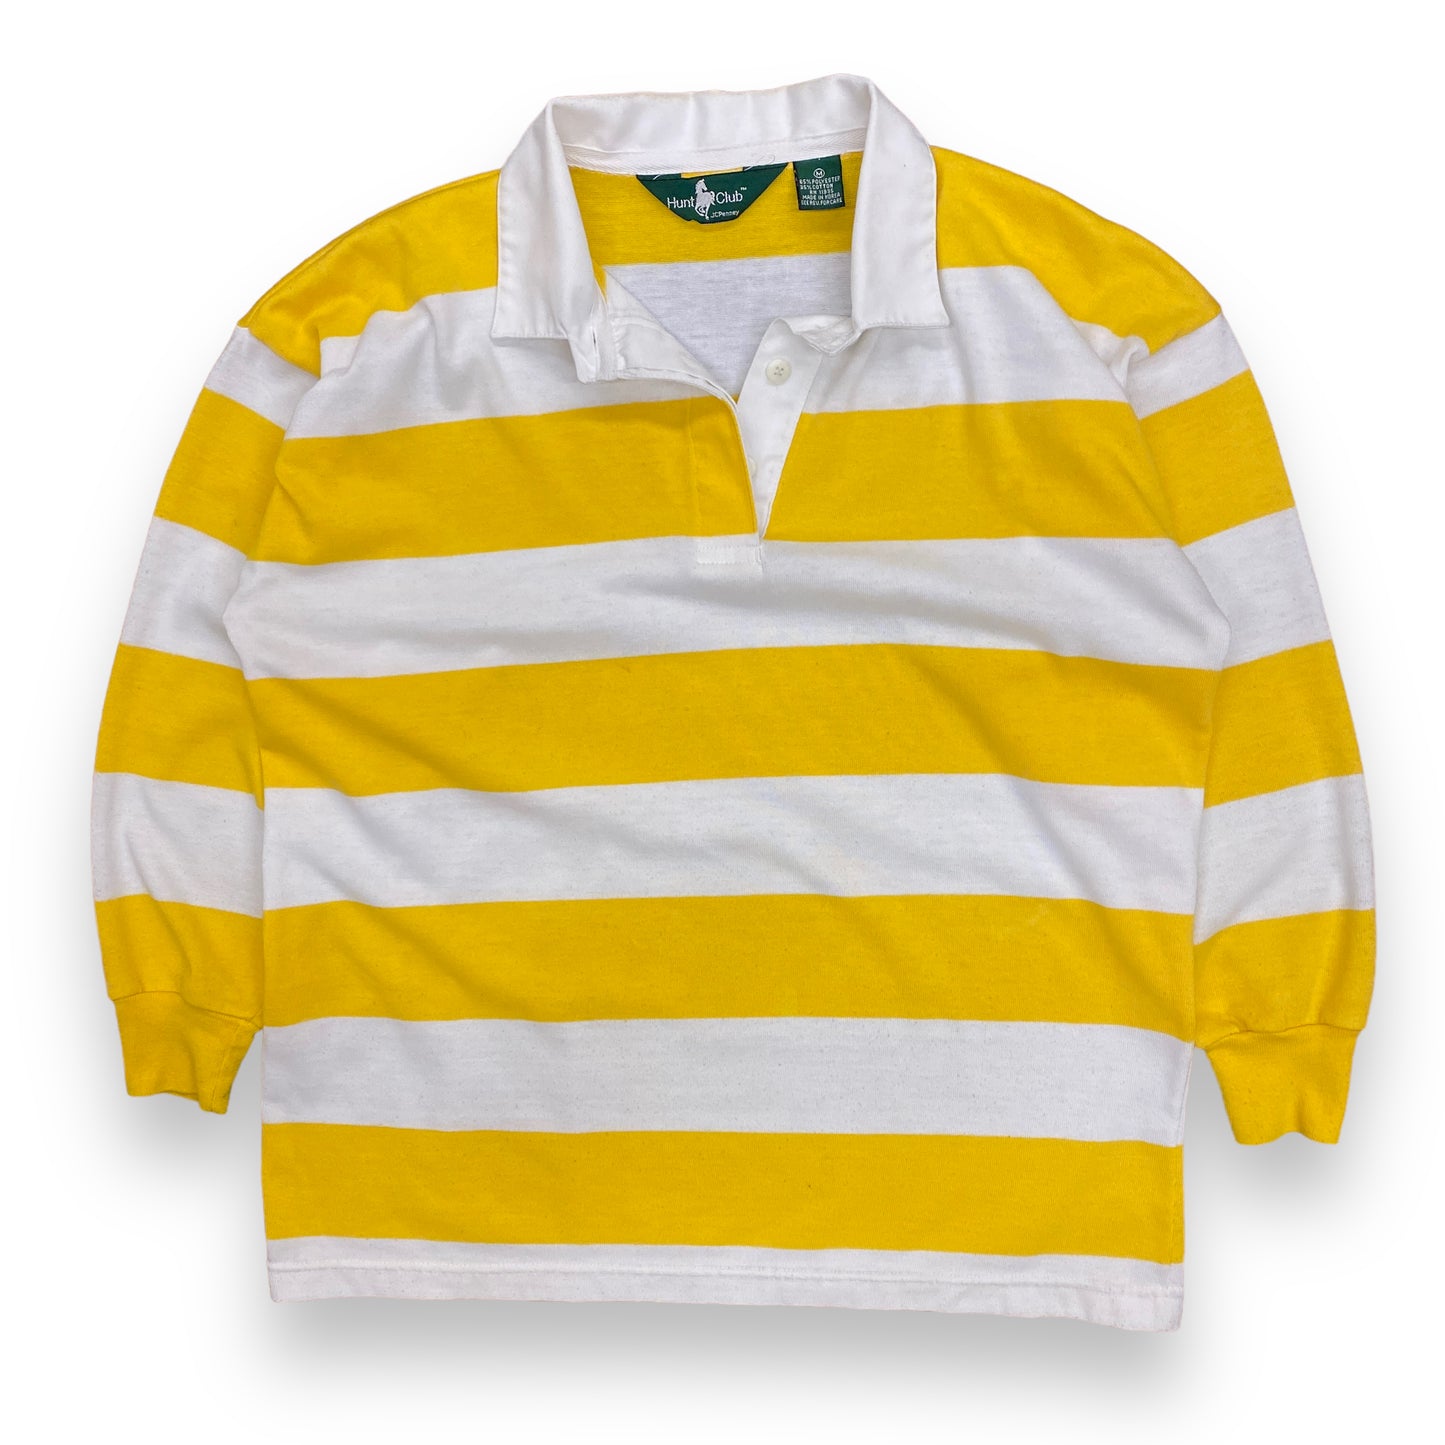 1980s Yellow & White Striped Rugby Shirt - Size Medium